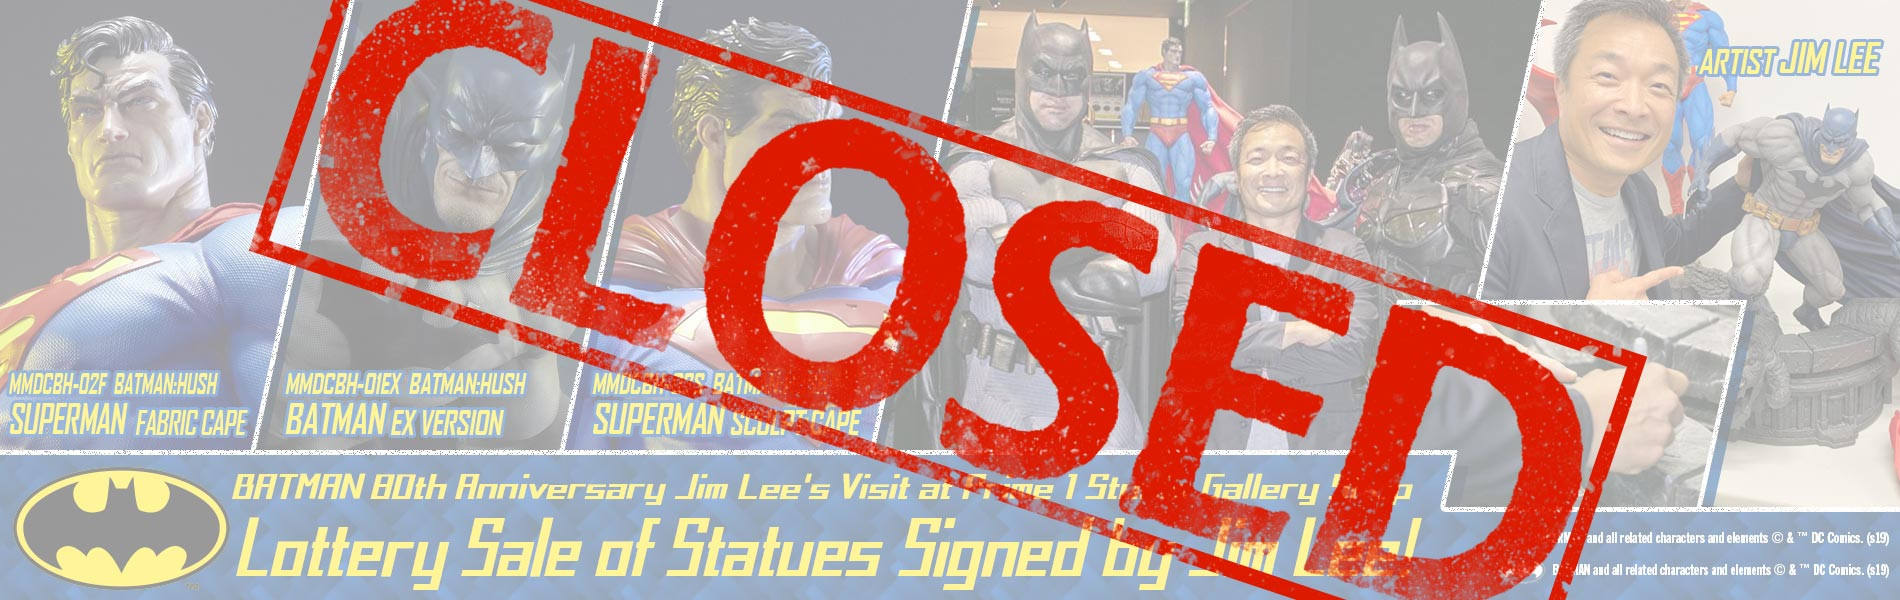 Lottery Sale of Statues Signed by Jim Lee is CLOSED